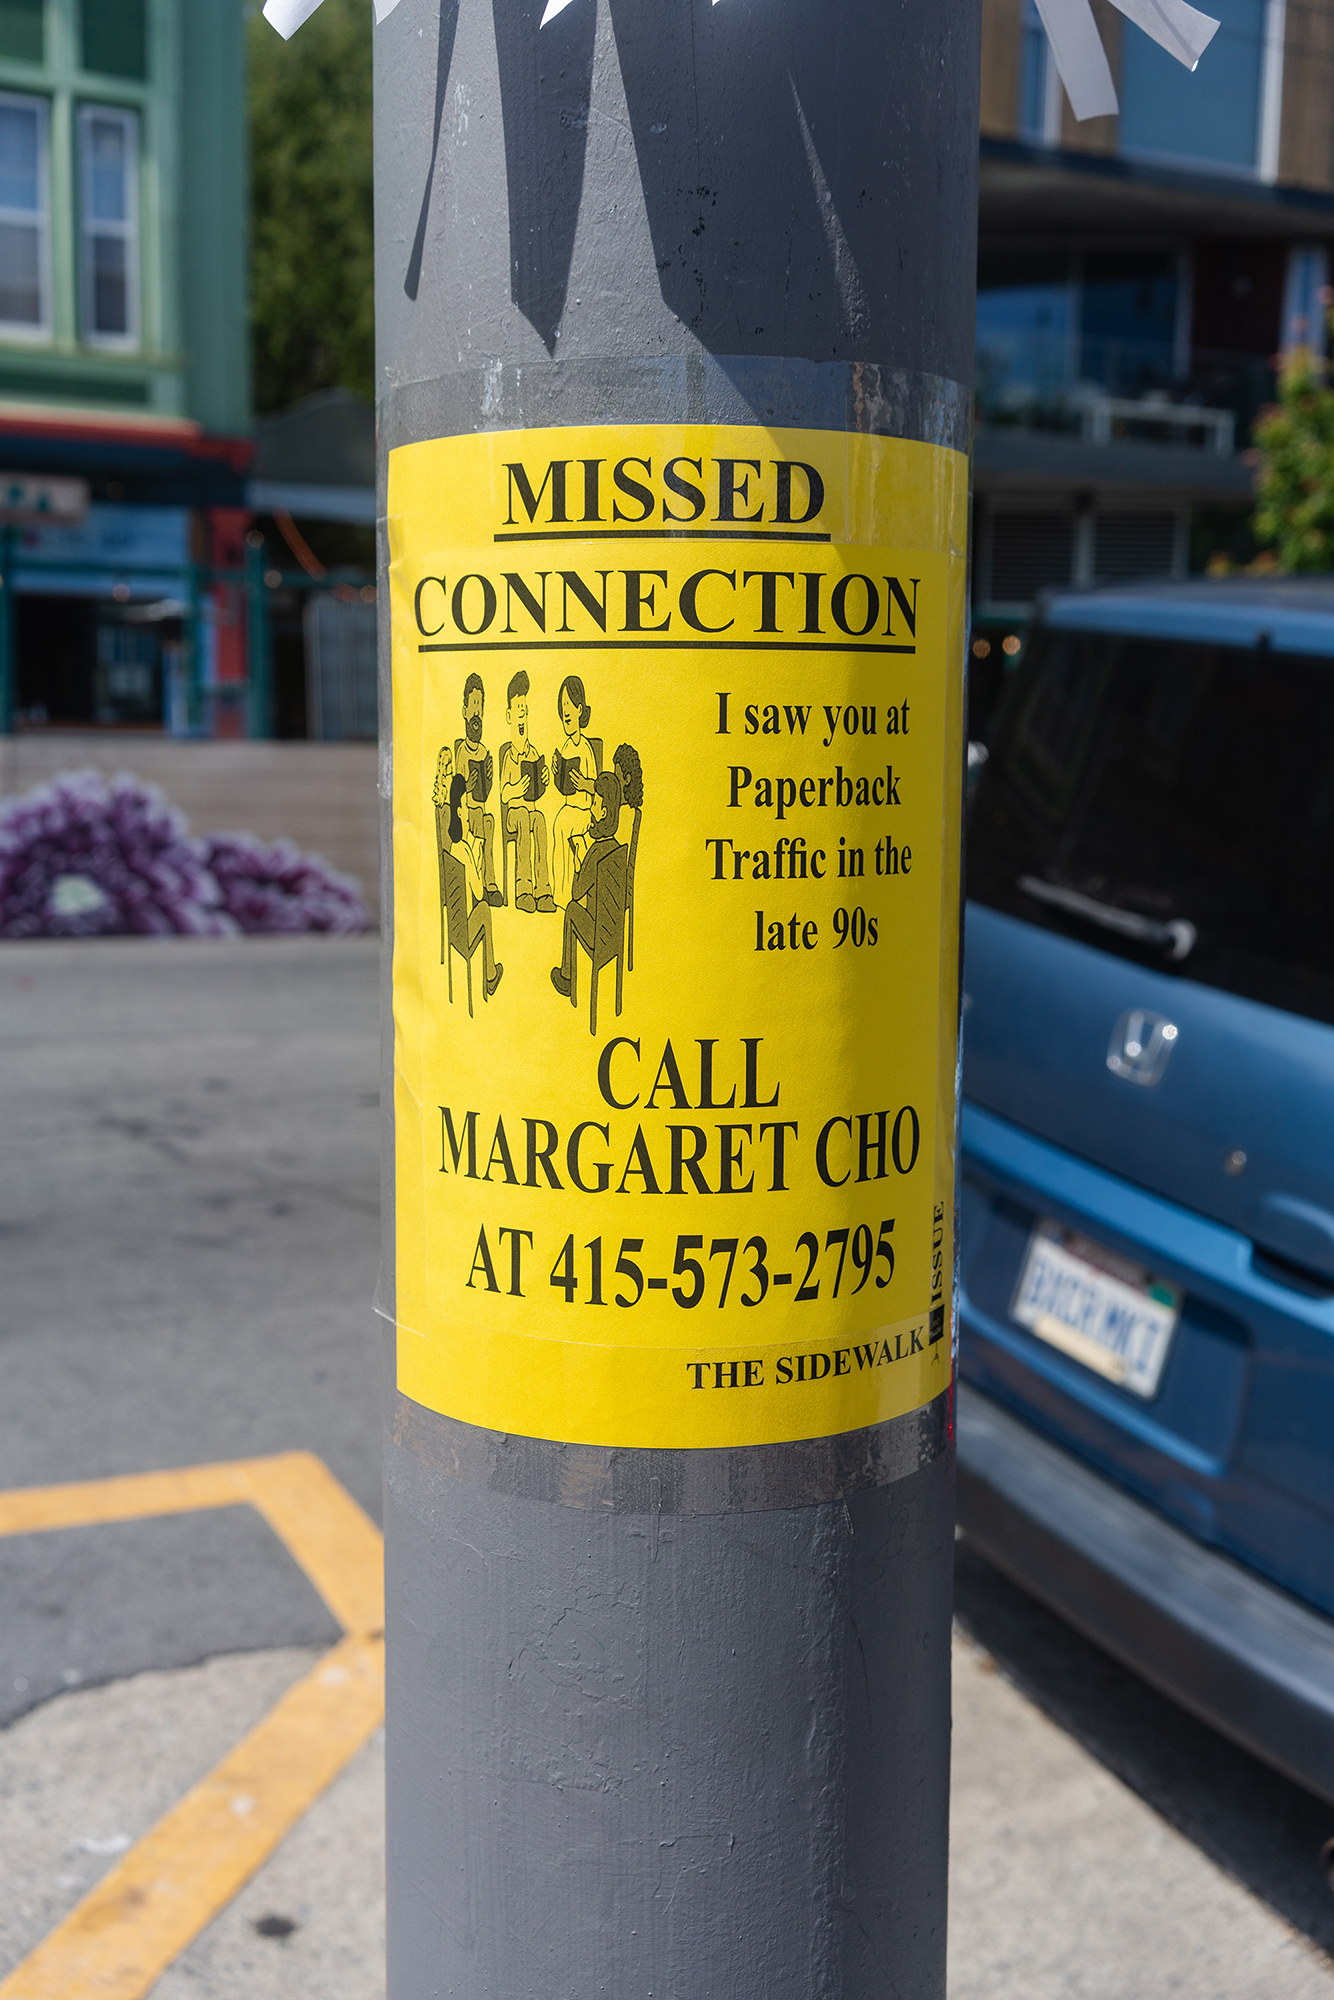 Image of a missed connection flyer